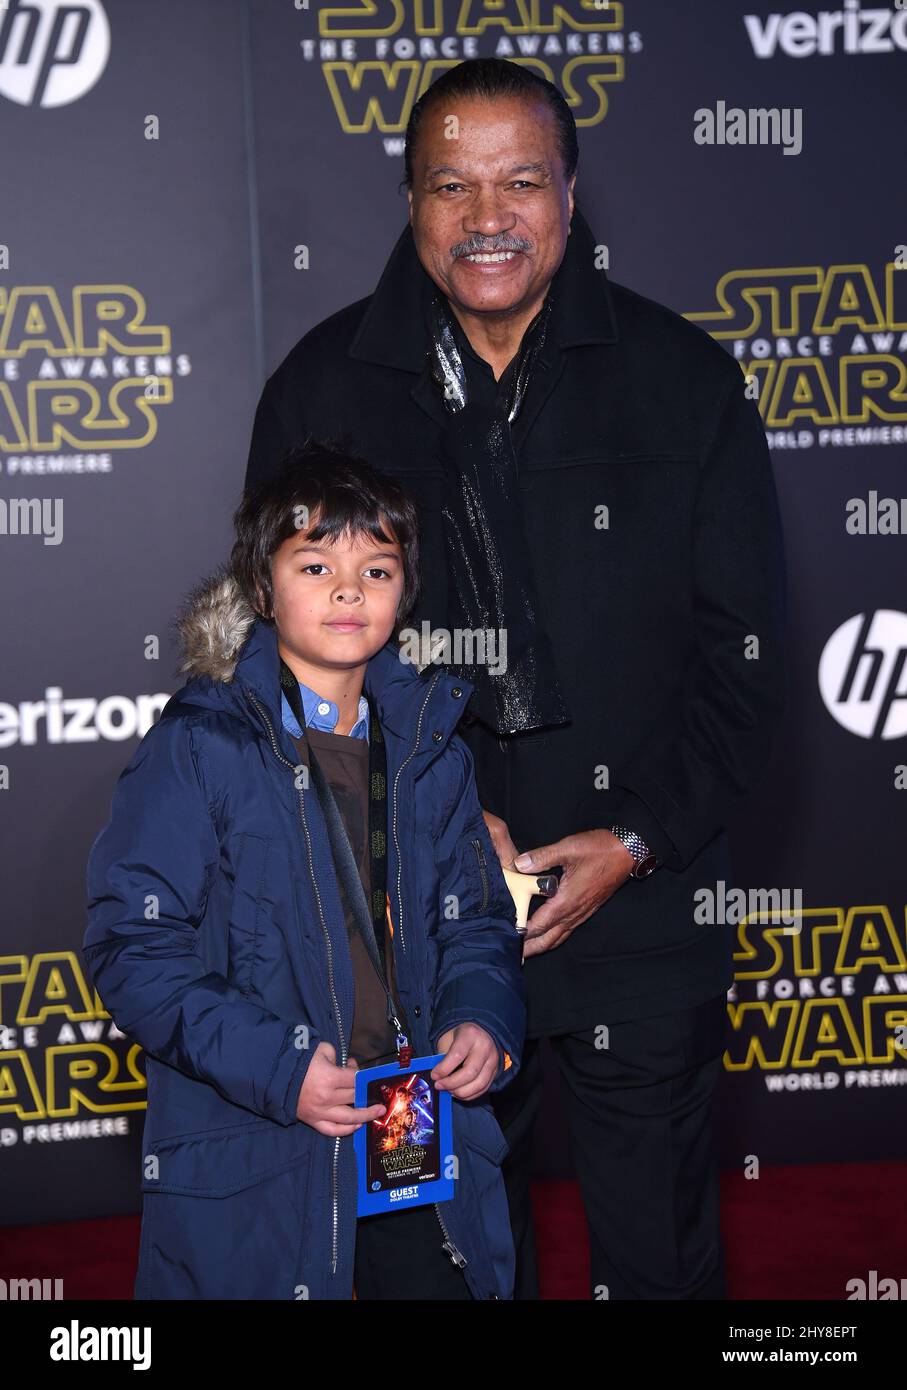 Billy Dee Williams attending the Star Wars: The Force Awakens Premiere Stock Photo